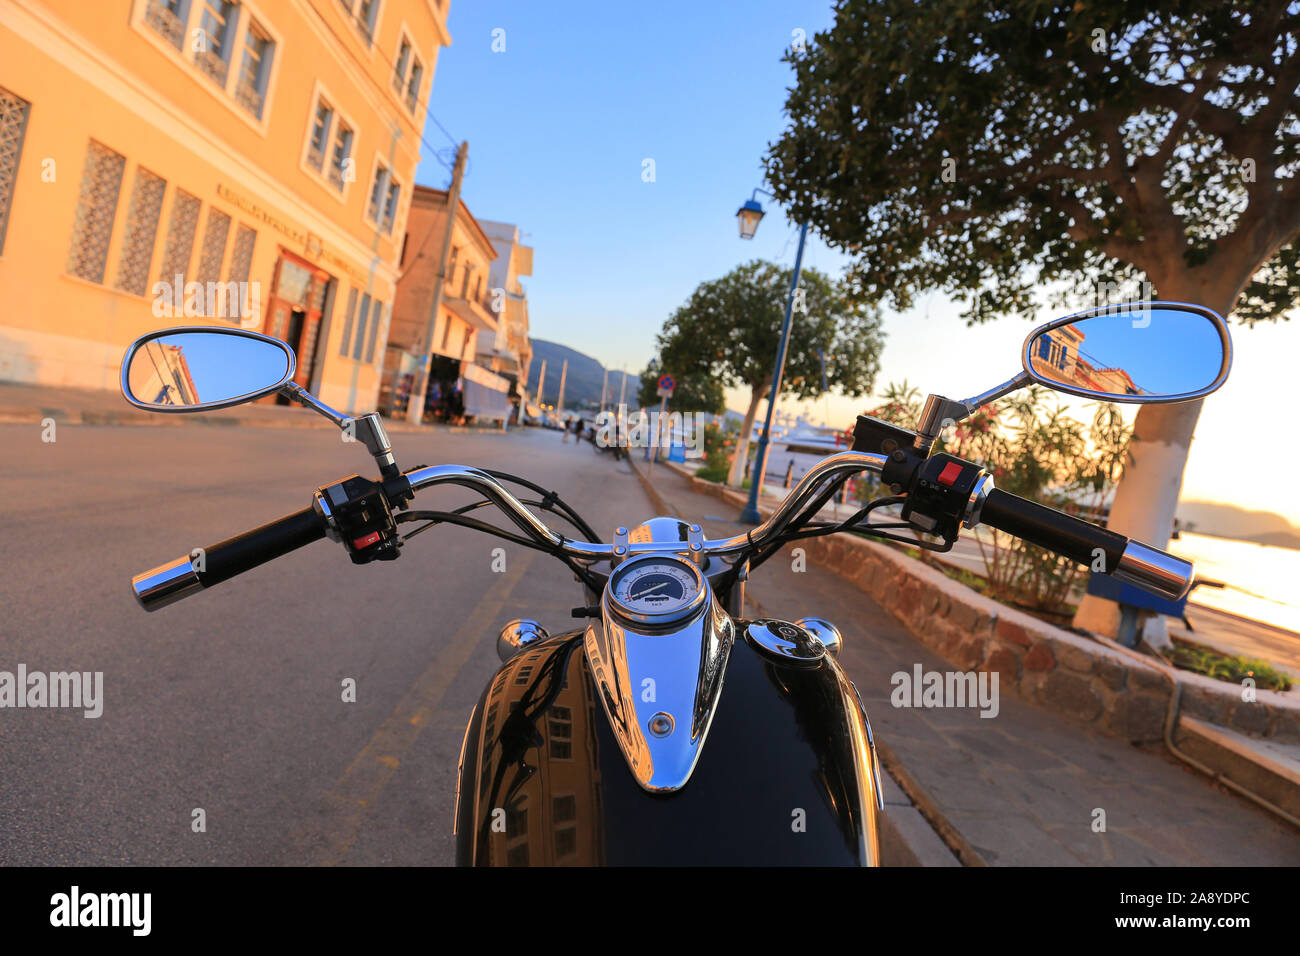 Motorcycle chopper on the street, POV view Stock Photo